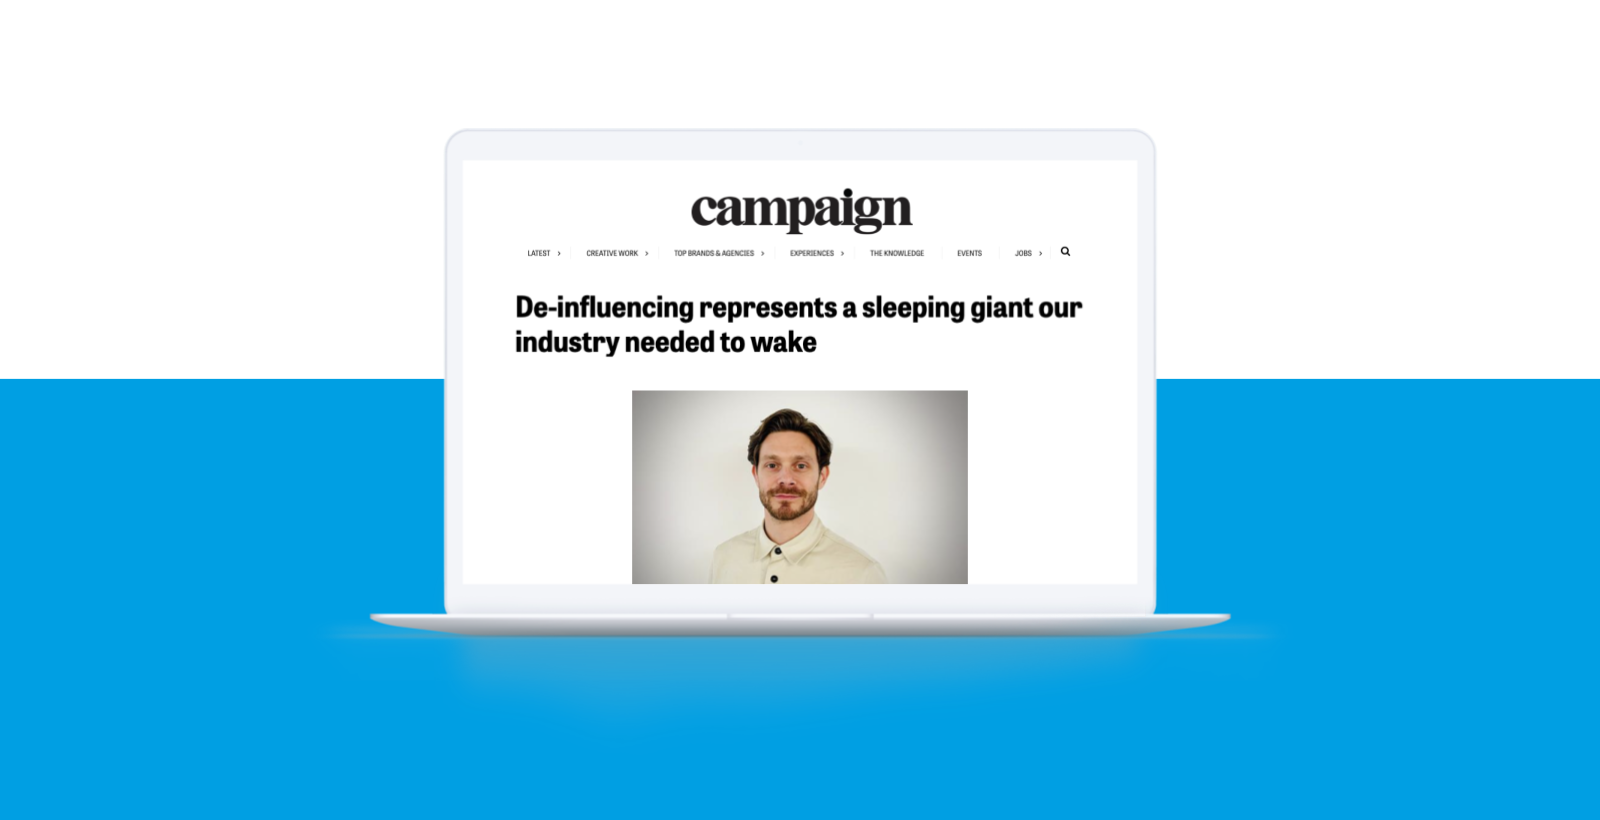 Chris Davis, Head of Growth speaks to Campaign about de-influencing